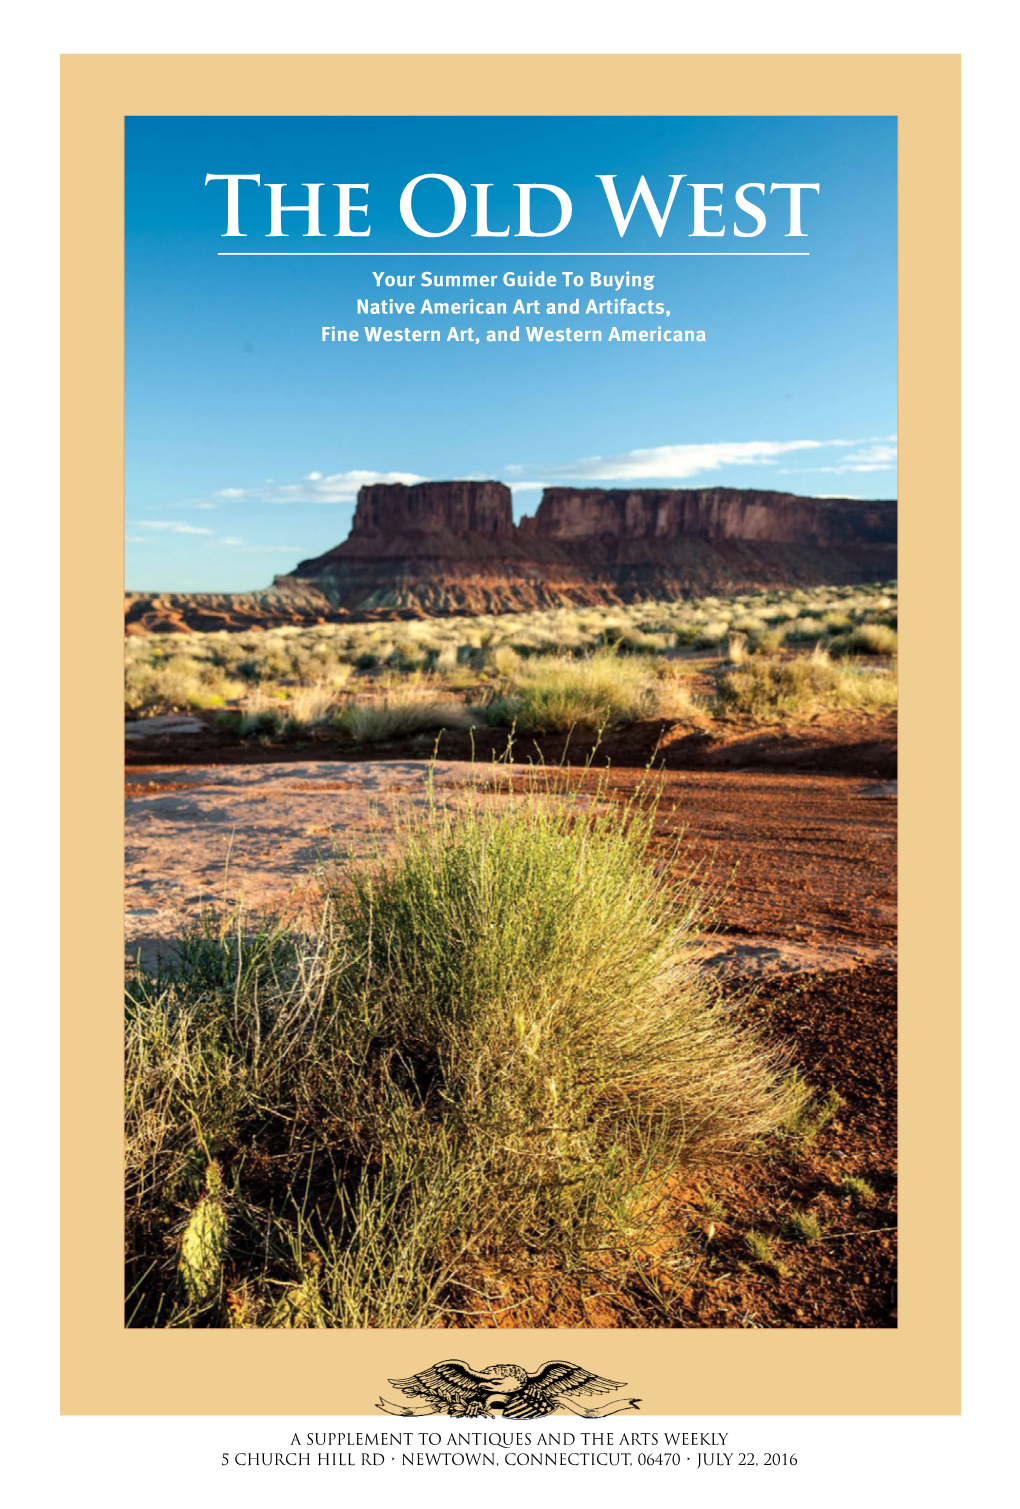 The Old West Your Summer Guide to Buying Native American Art and Artifacts, Fine Western Art, and Western Americana